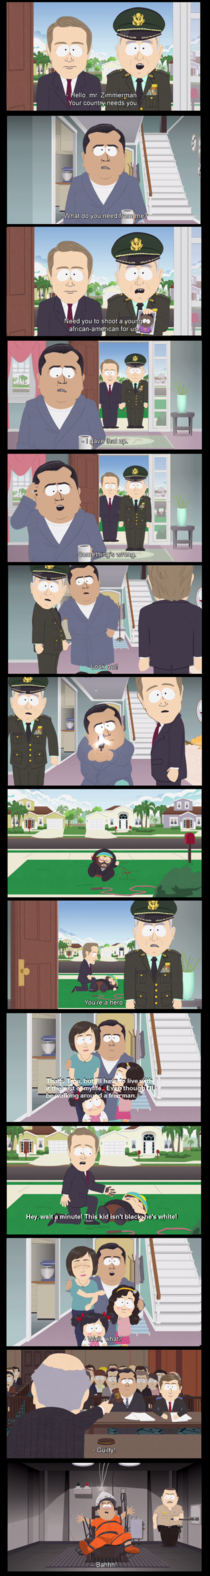 I need to watch more South Park